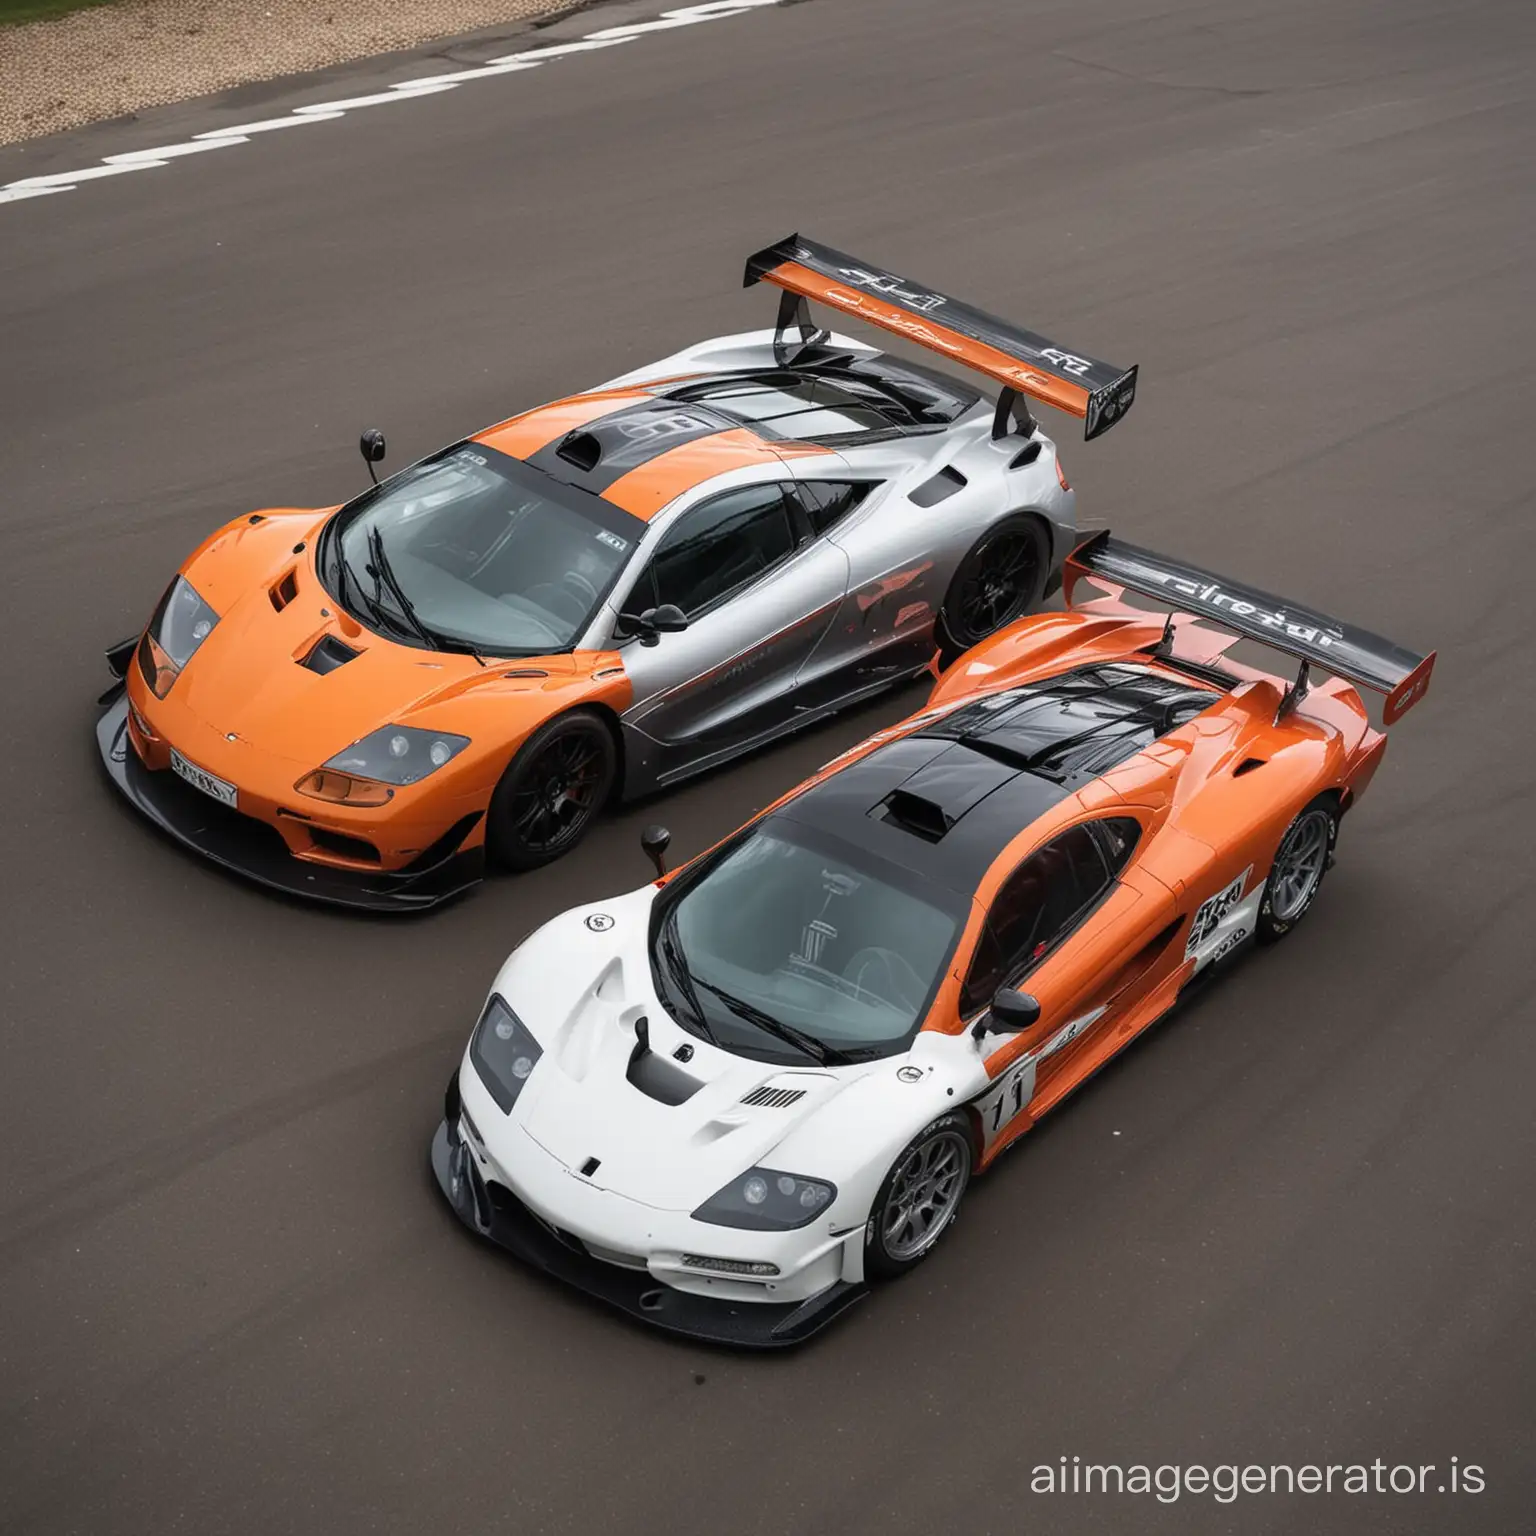 Comparison-of-McLaren-F1-GTR-Short-Tail-and-Long-Tail-Models